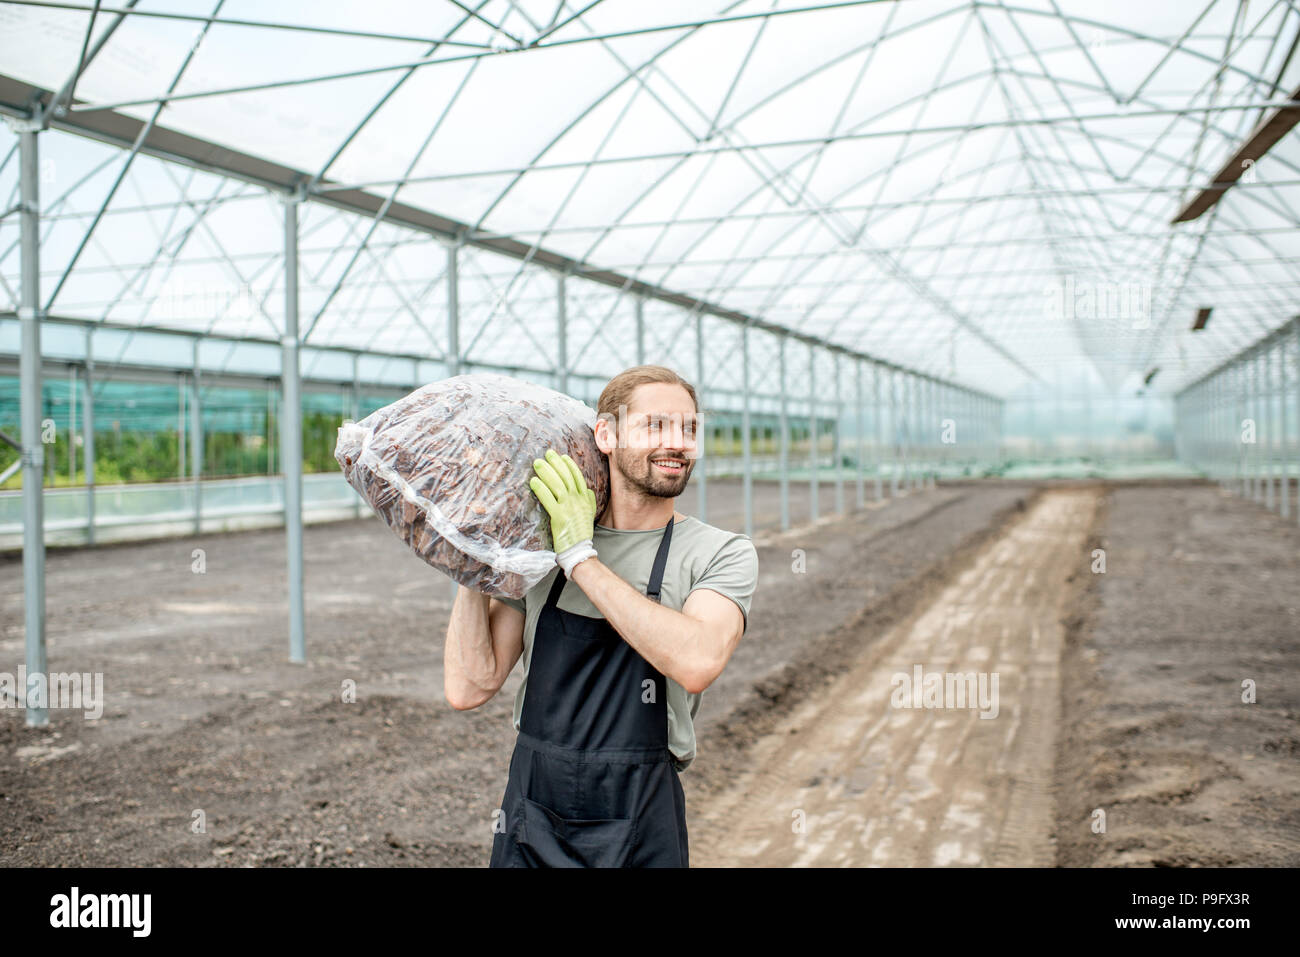 Farmer with bag in the glasshouse Stock Photo